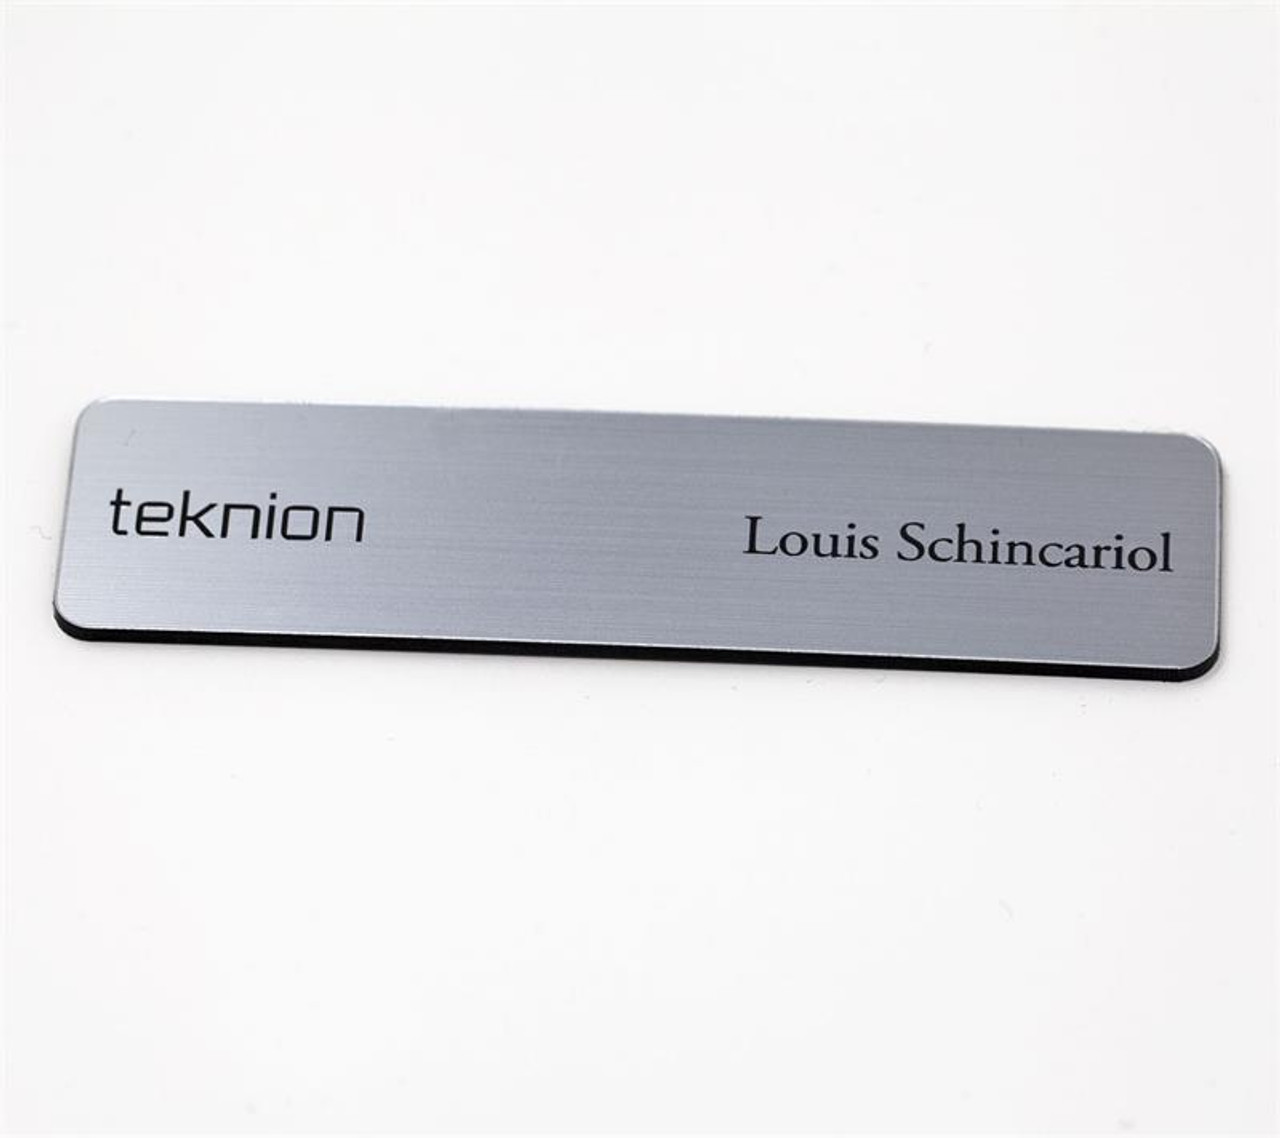 Metal name tags with engraved logo and text